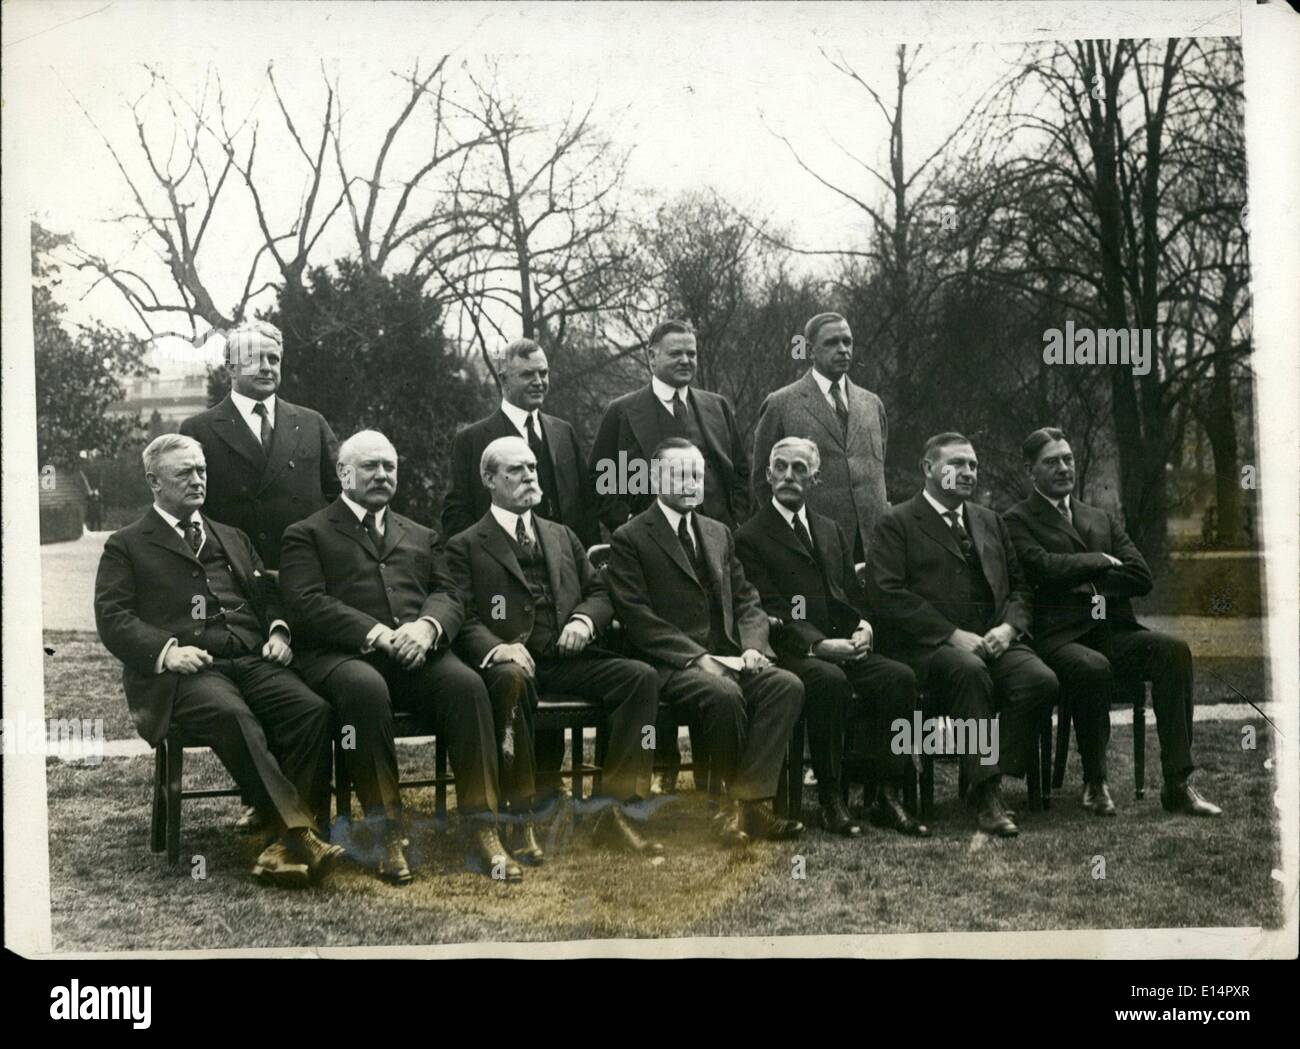 Apr. 18, 2012 - Members of the Cabinet photograph: left to right seated; Postmaster Gen. Harry S. New, Sedy of War John W. Weeks, Secy of State Chas. E. Hughes, President Coolidge; Secy of Treasury Andrew W. Mellon, Atty Gen. Harlan F. Stone and Secy of the Navy Curtis D. Wilbur. Standing: Secy of Labor James J. Davis, Secy of Agriculture Henry C. Wallace, Secy of Commerce Herbert Hoover, and Secy of Interior Hubert Work. Stock Photo